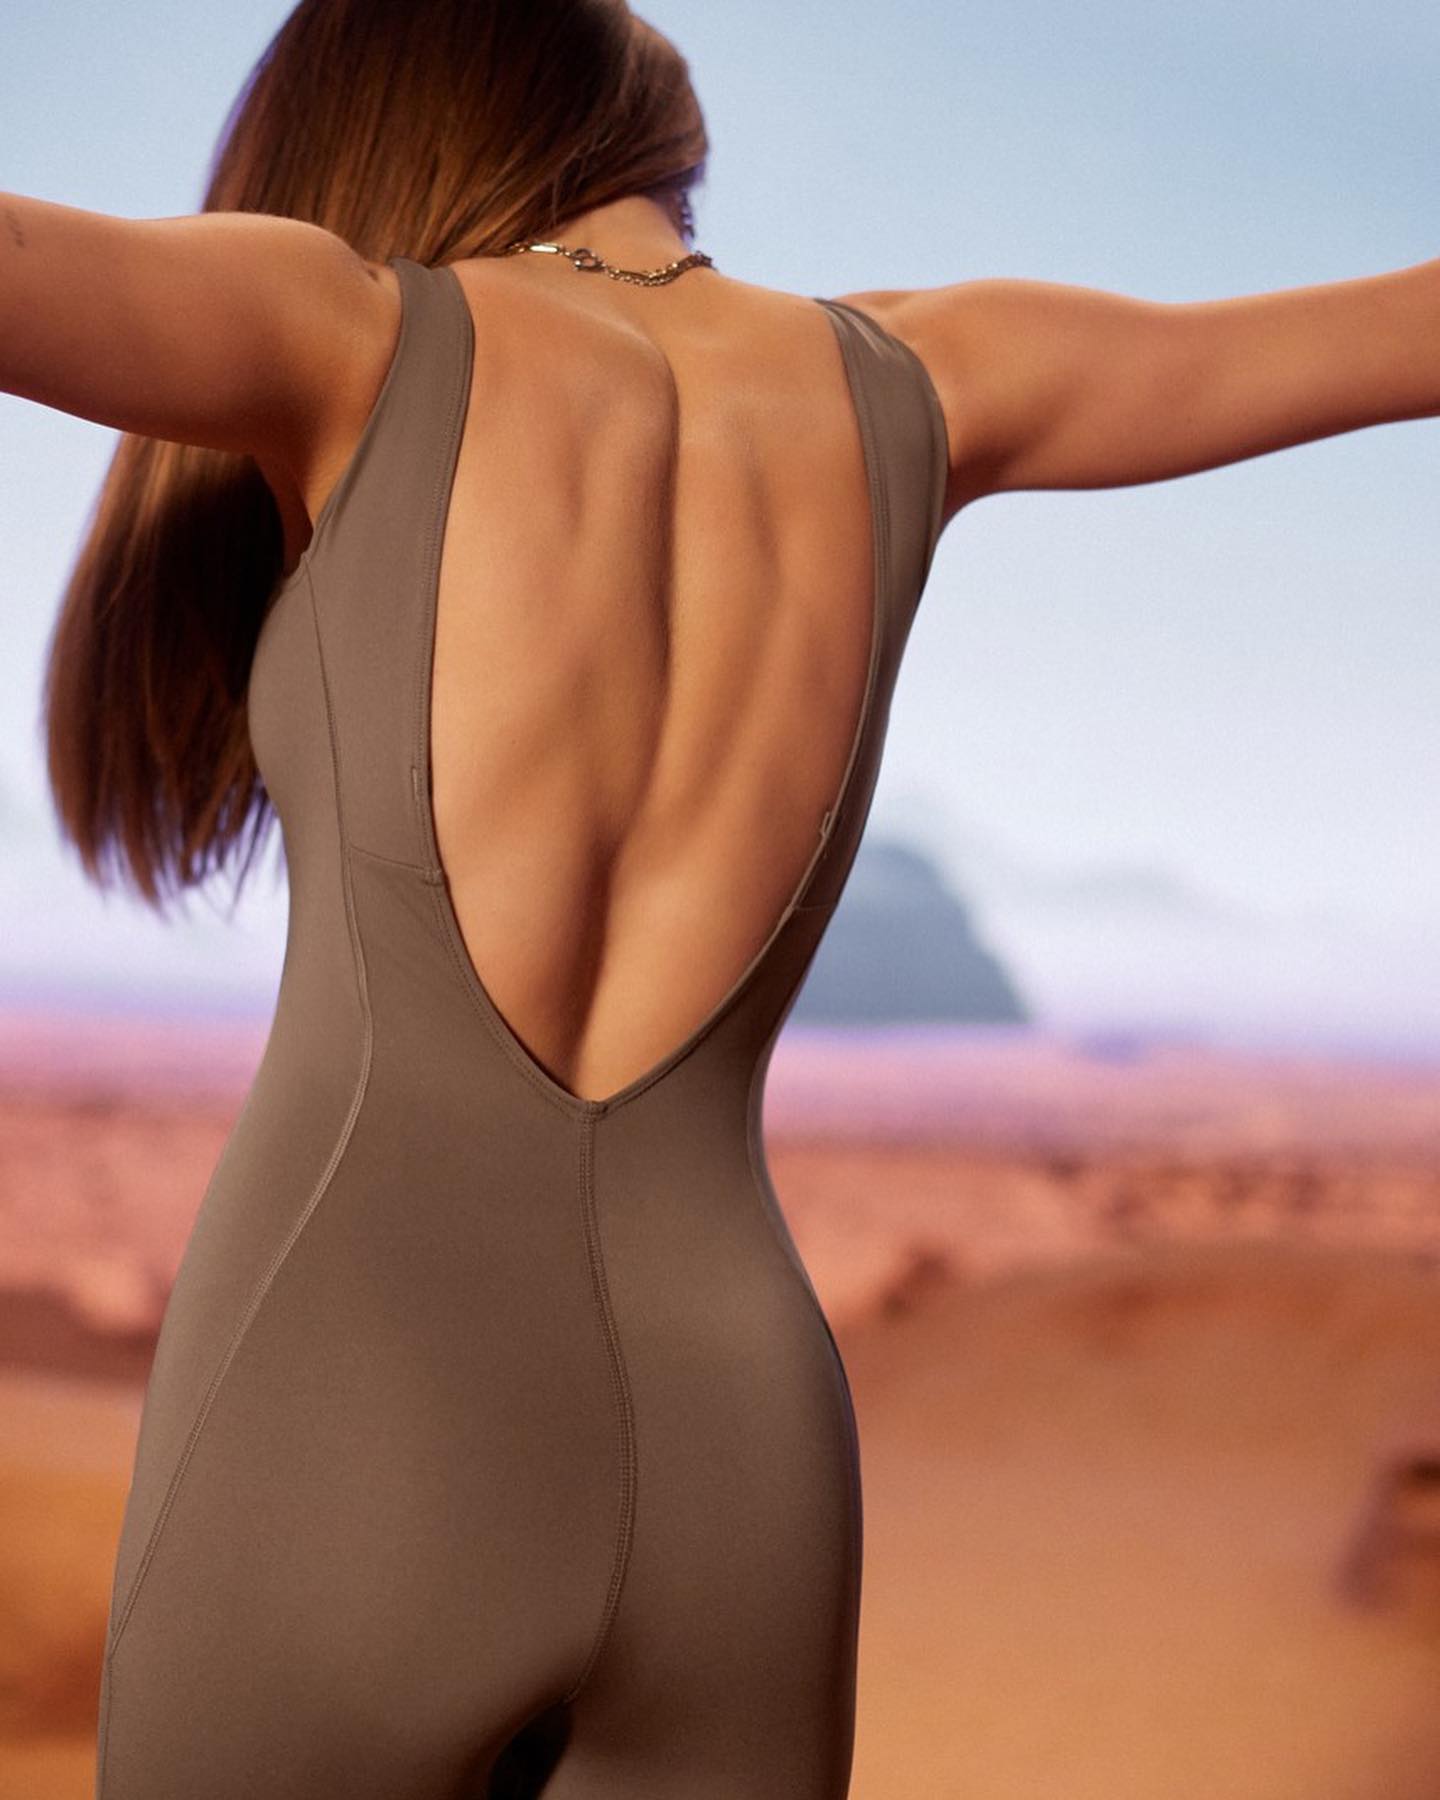 Photos n°4 : Maddie Ziegler Goes to The Desert With New Fabletics Line!